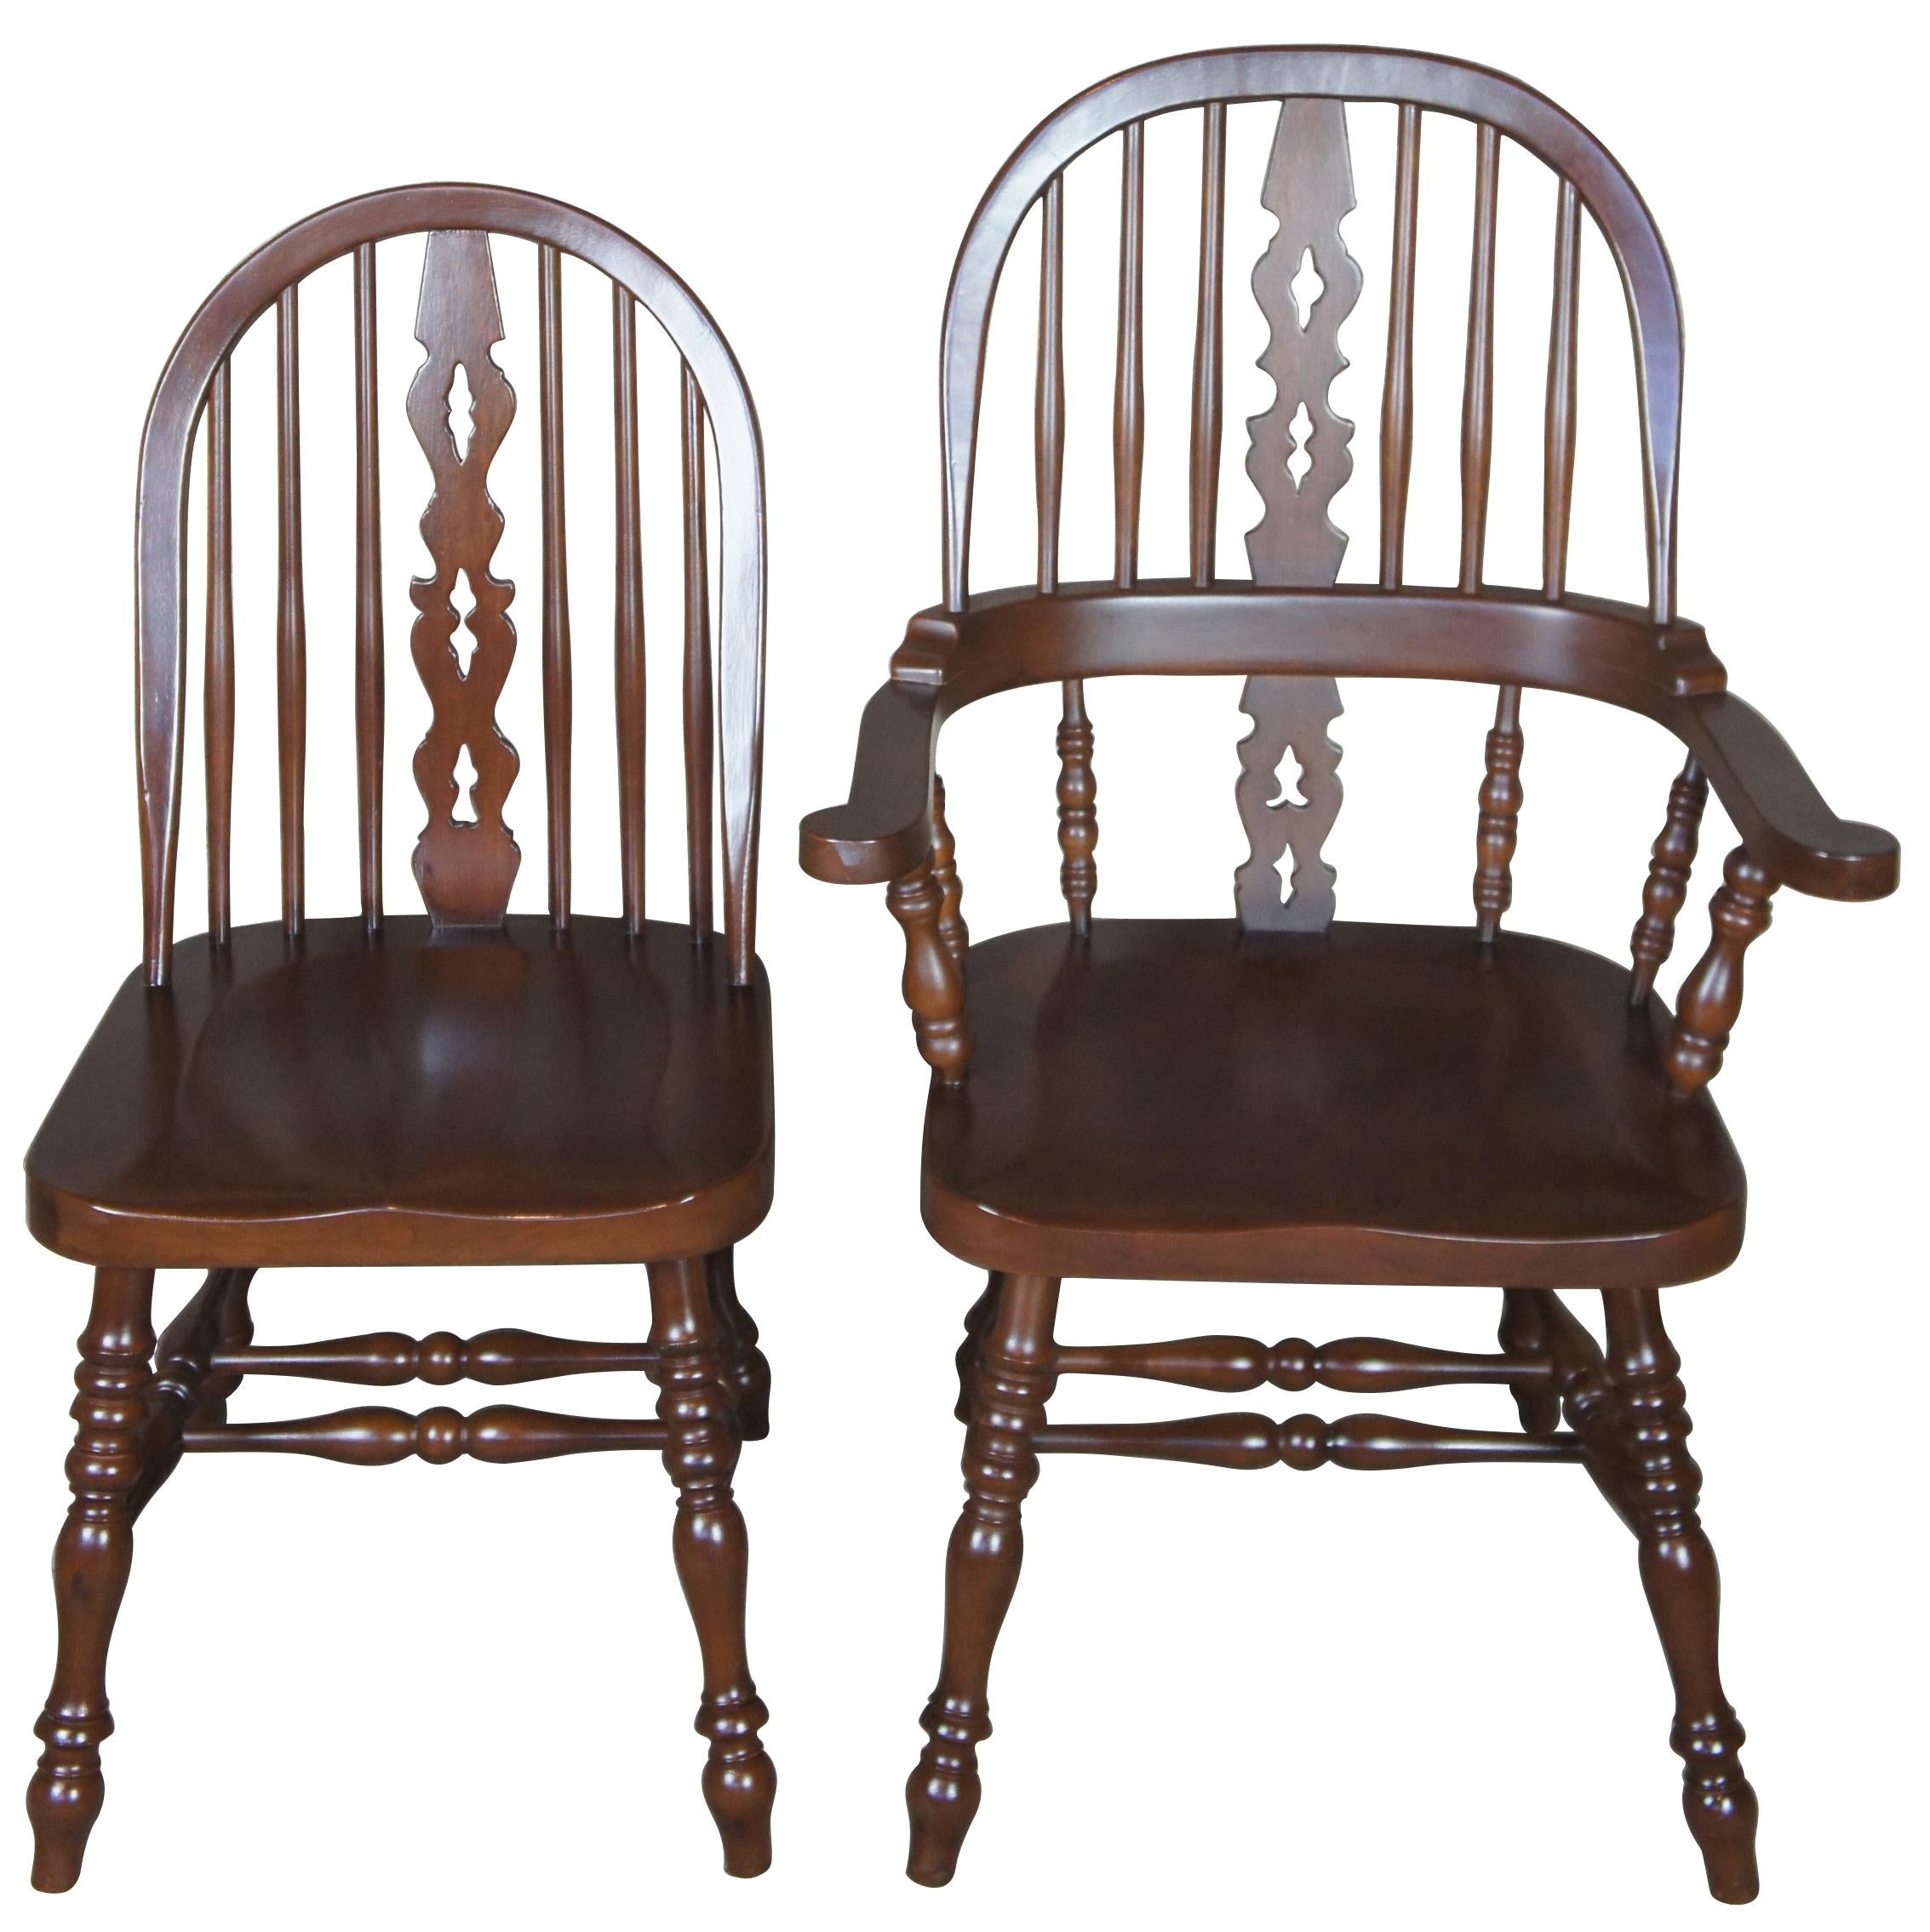 8 solid mahogany English Windsor style spindle back dining chairs

Set of eight solid mahogany English Windsor style spindle back dining chairs. Modeled after Ethan Allen Royal Charter Windsor collection, very heavy.